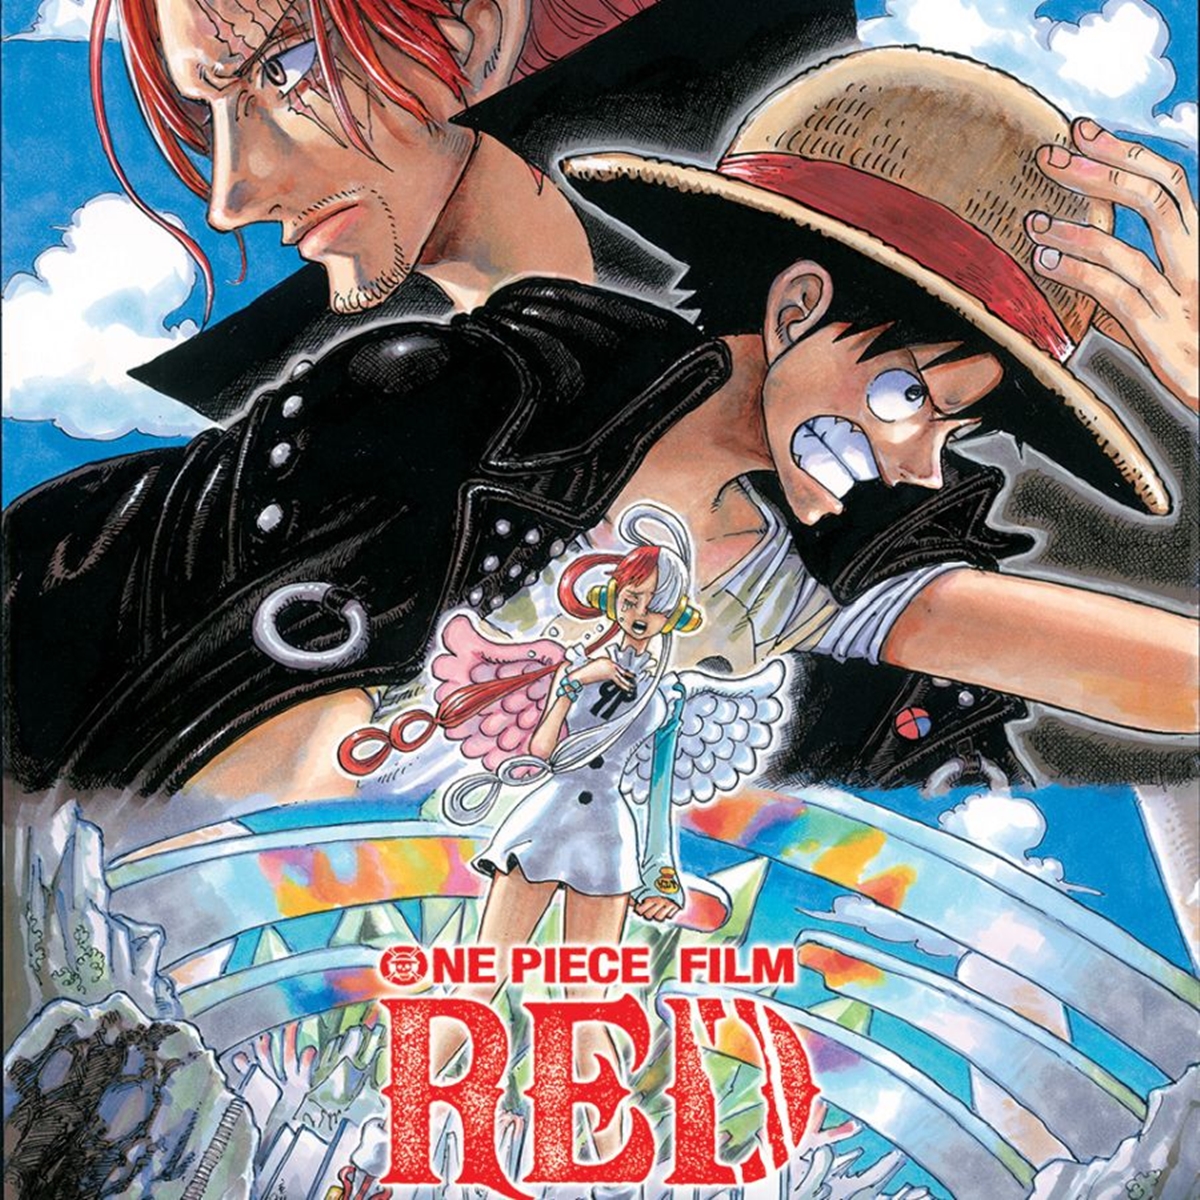 How To Watch One Piece Film ‘Red’ In US